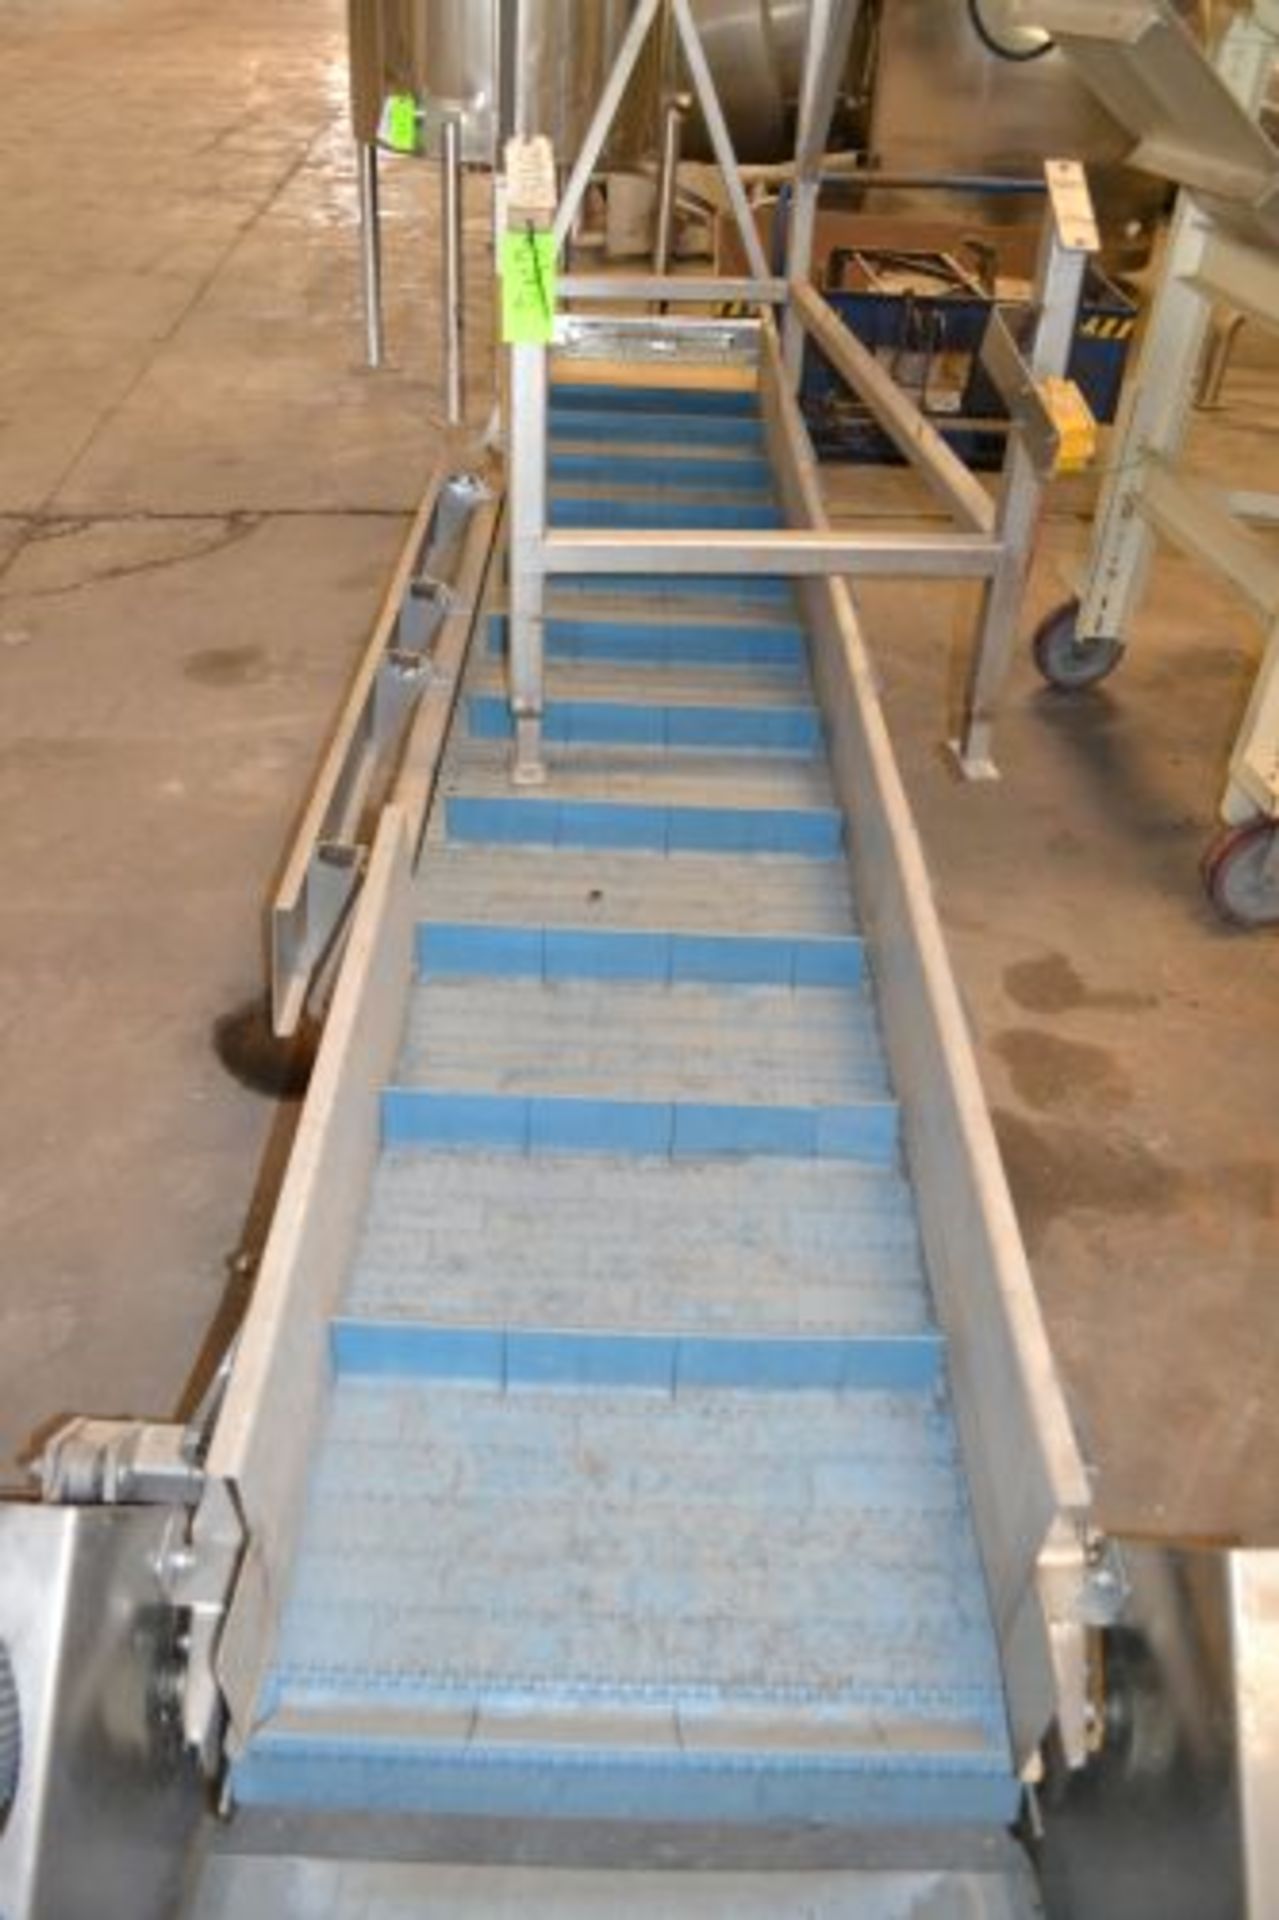 24” wide x 13’ long stainless steel incline conveyor - Image 2 of 4